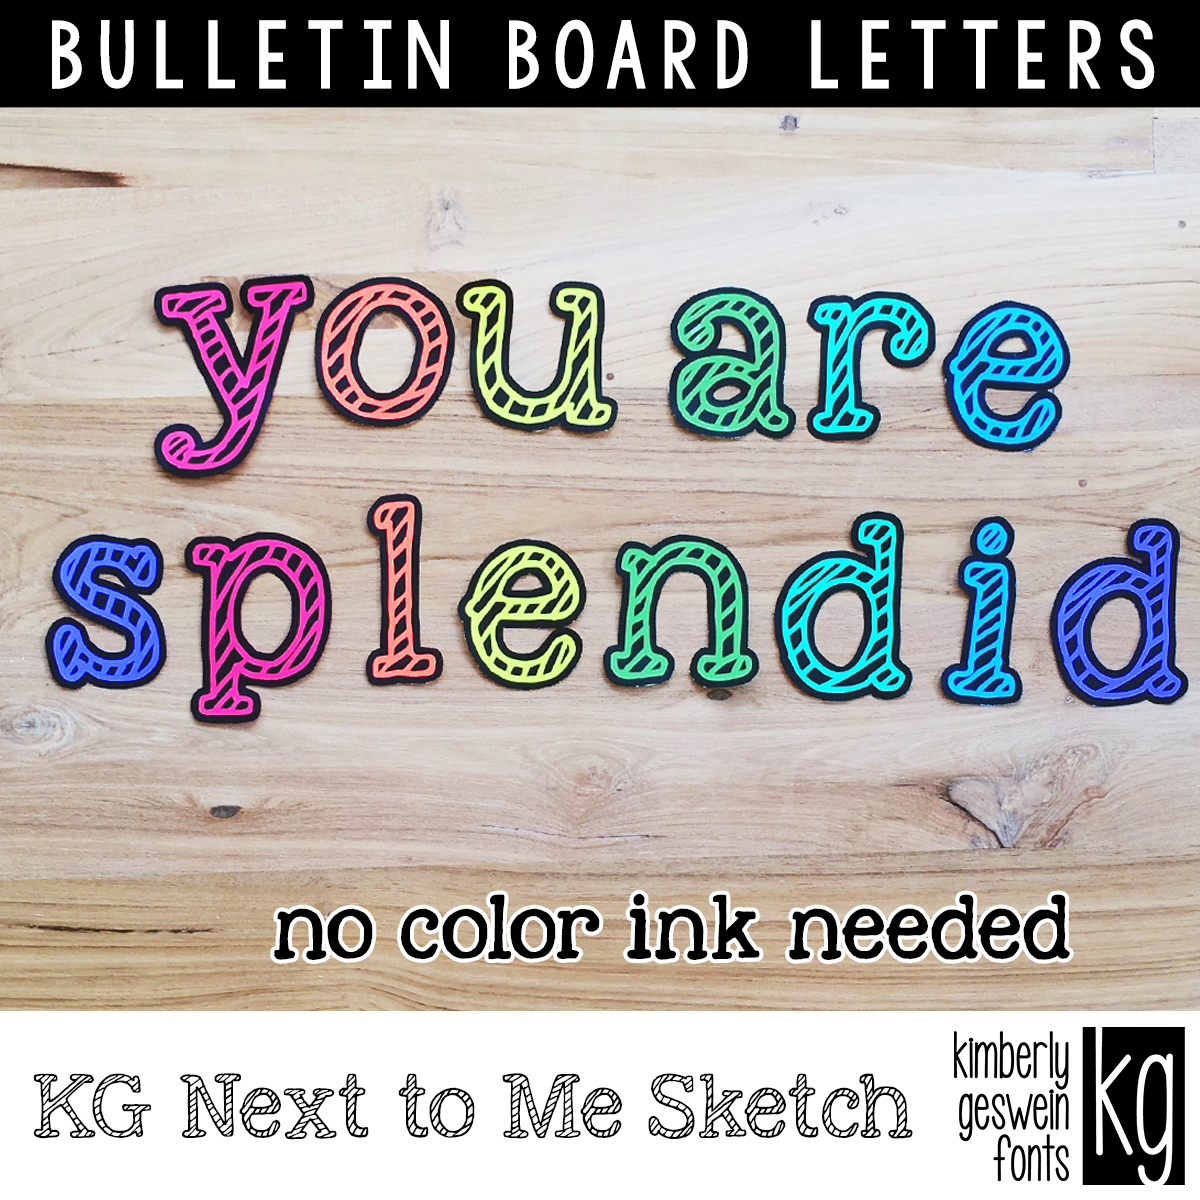 KG Next to Me Sketch Bulletin Board Letters - Kimberly Geswein Fonts